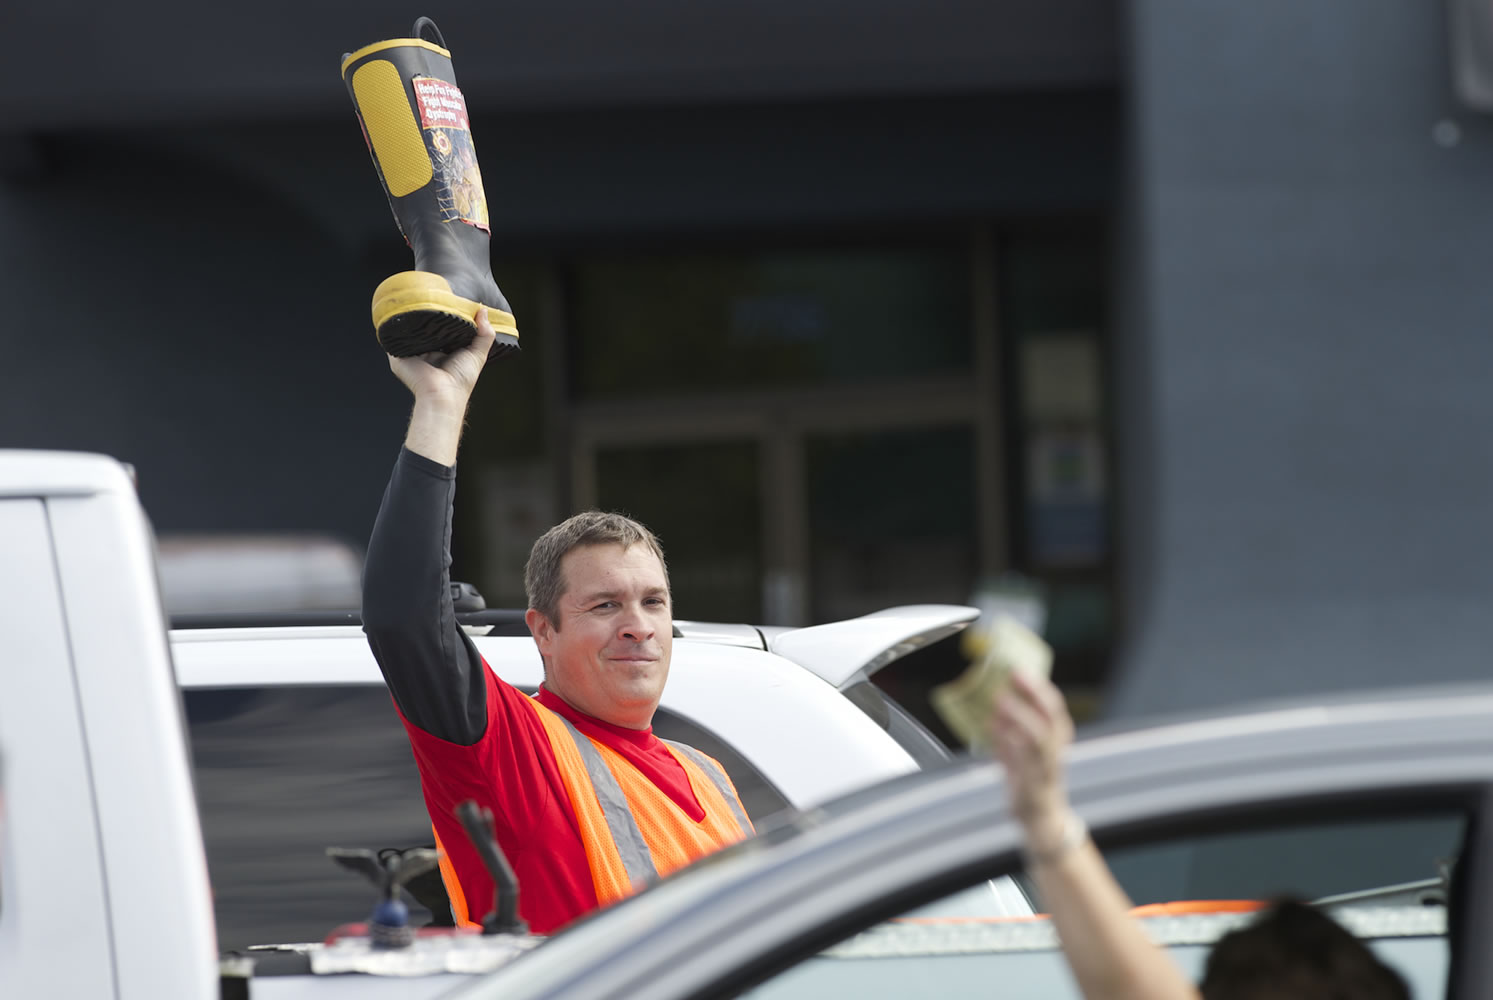 Vancouver Fire Department's Tom Cook collects a donation from a motorist on Northeast 78th Street near Interstate 5 in Hazel Dell on Thursday as part of &quot;Fill the Boot,&quot; which raises money for the Muscular Dystrophy Association.